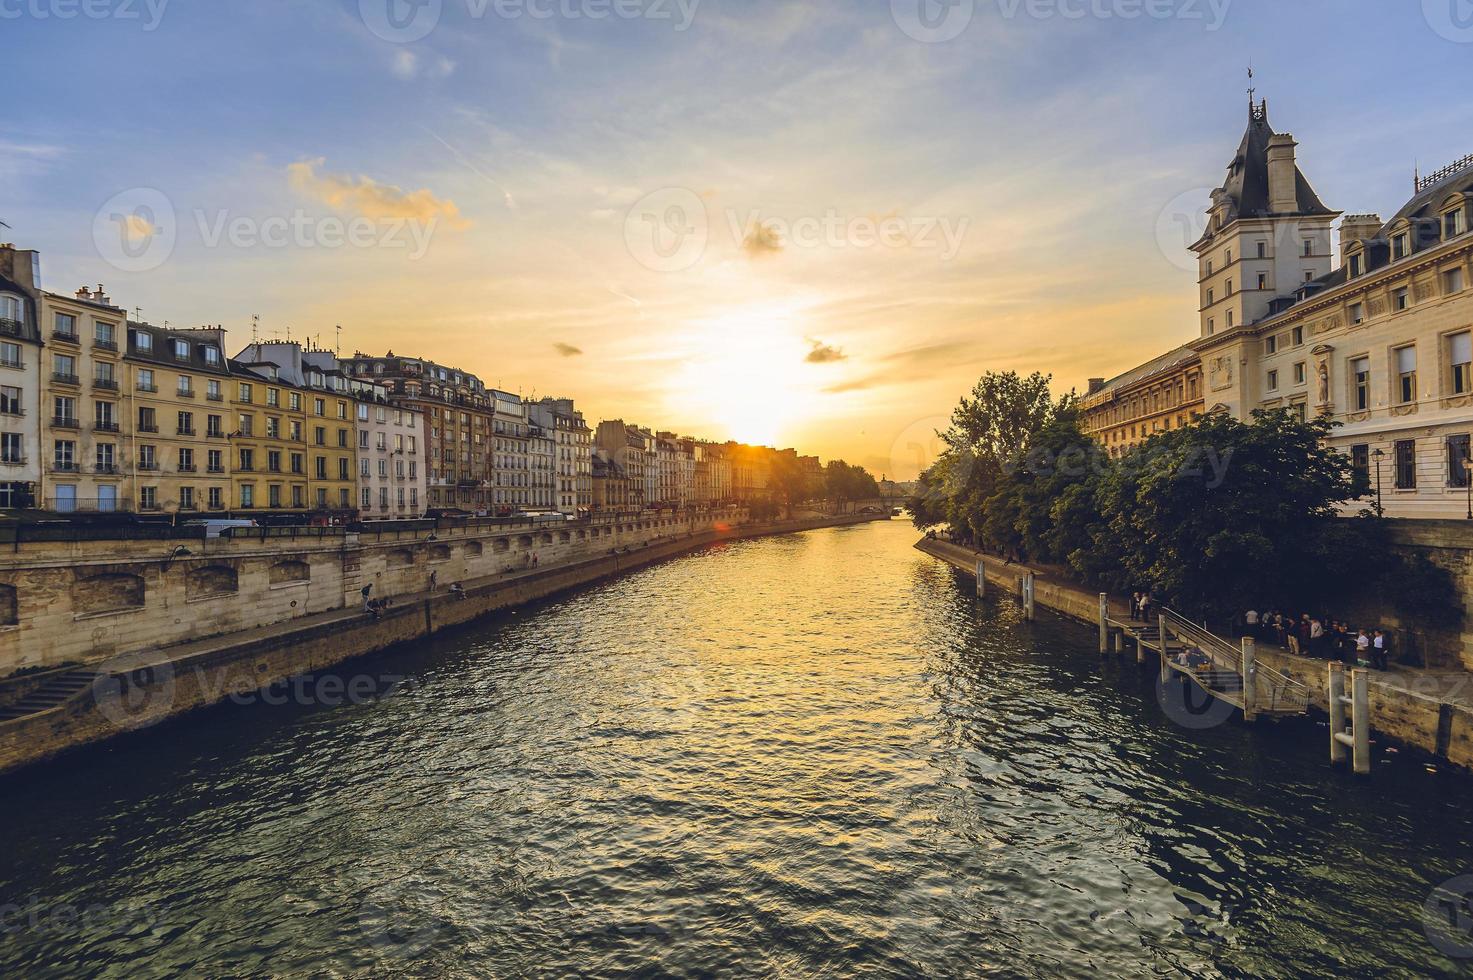 Court of Cassation of France in Paris and left bank of Seine river at dusk photo